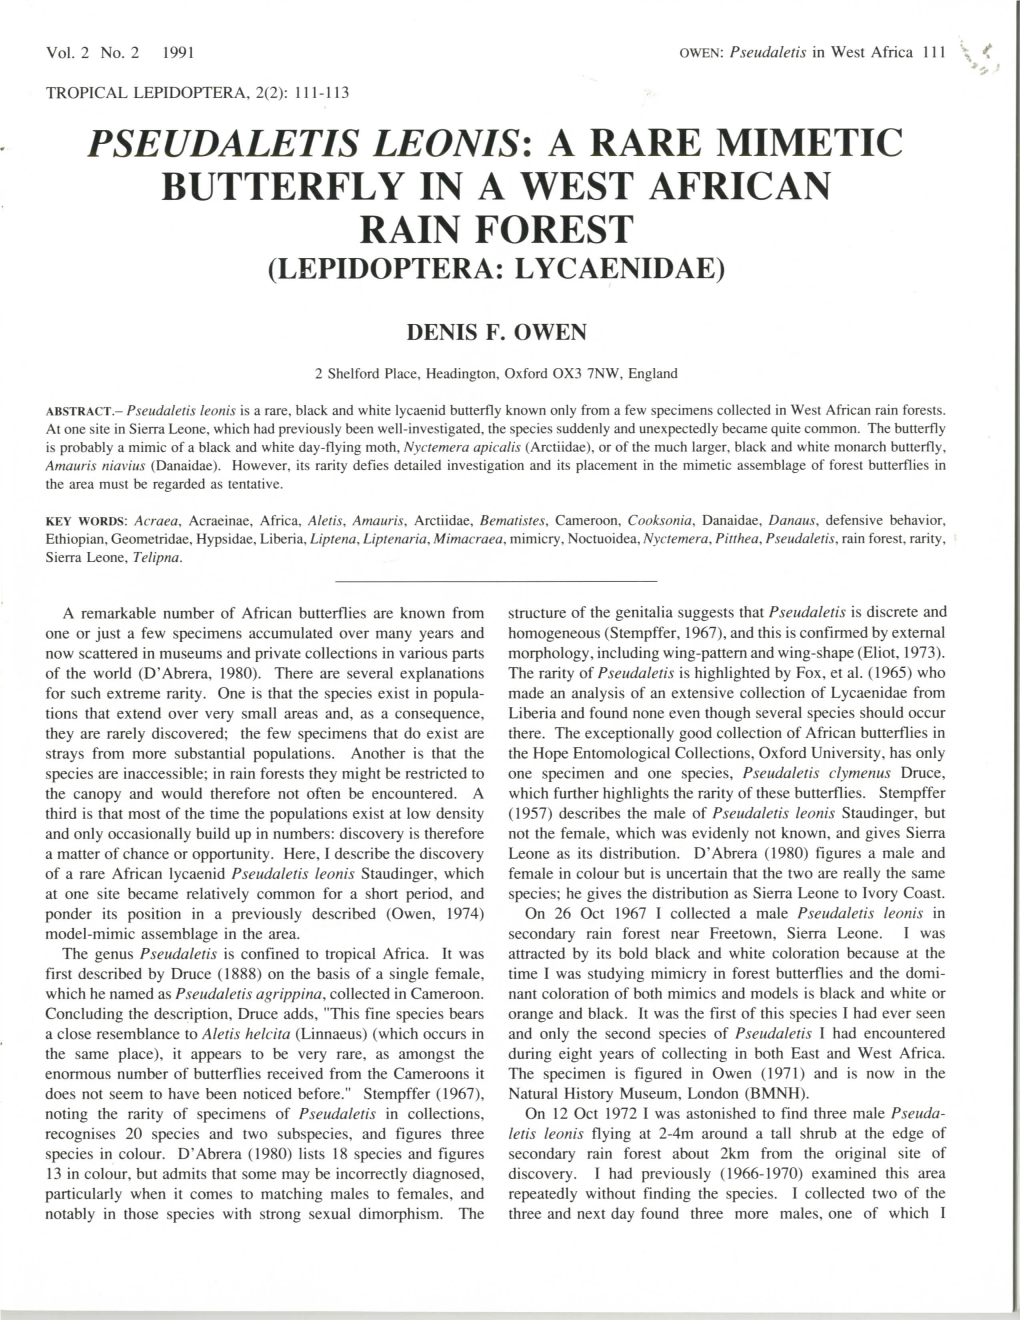 Pseudaletis Leonis: a Rare Mimetic Butterfly in a West African Rain Forest (Lepidoptera: Lycaenidae)